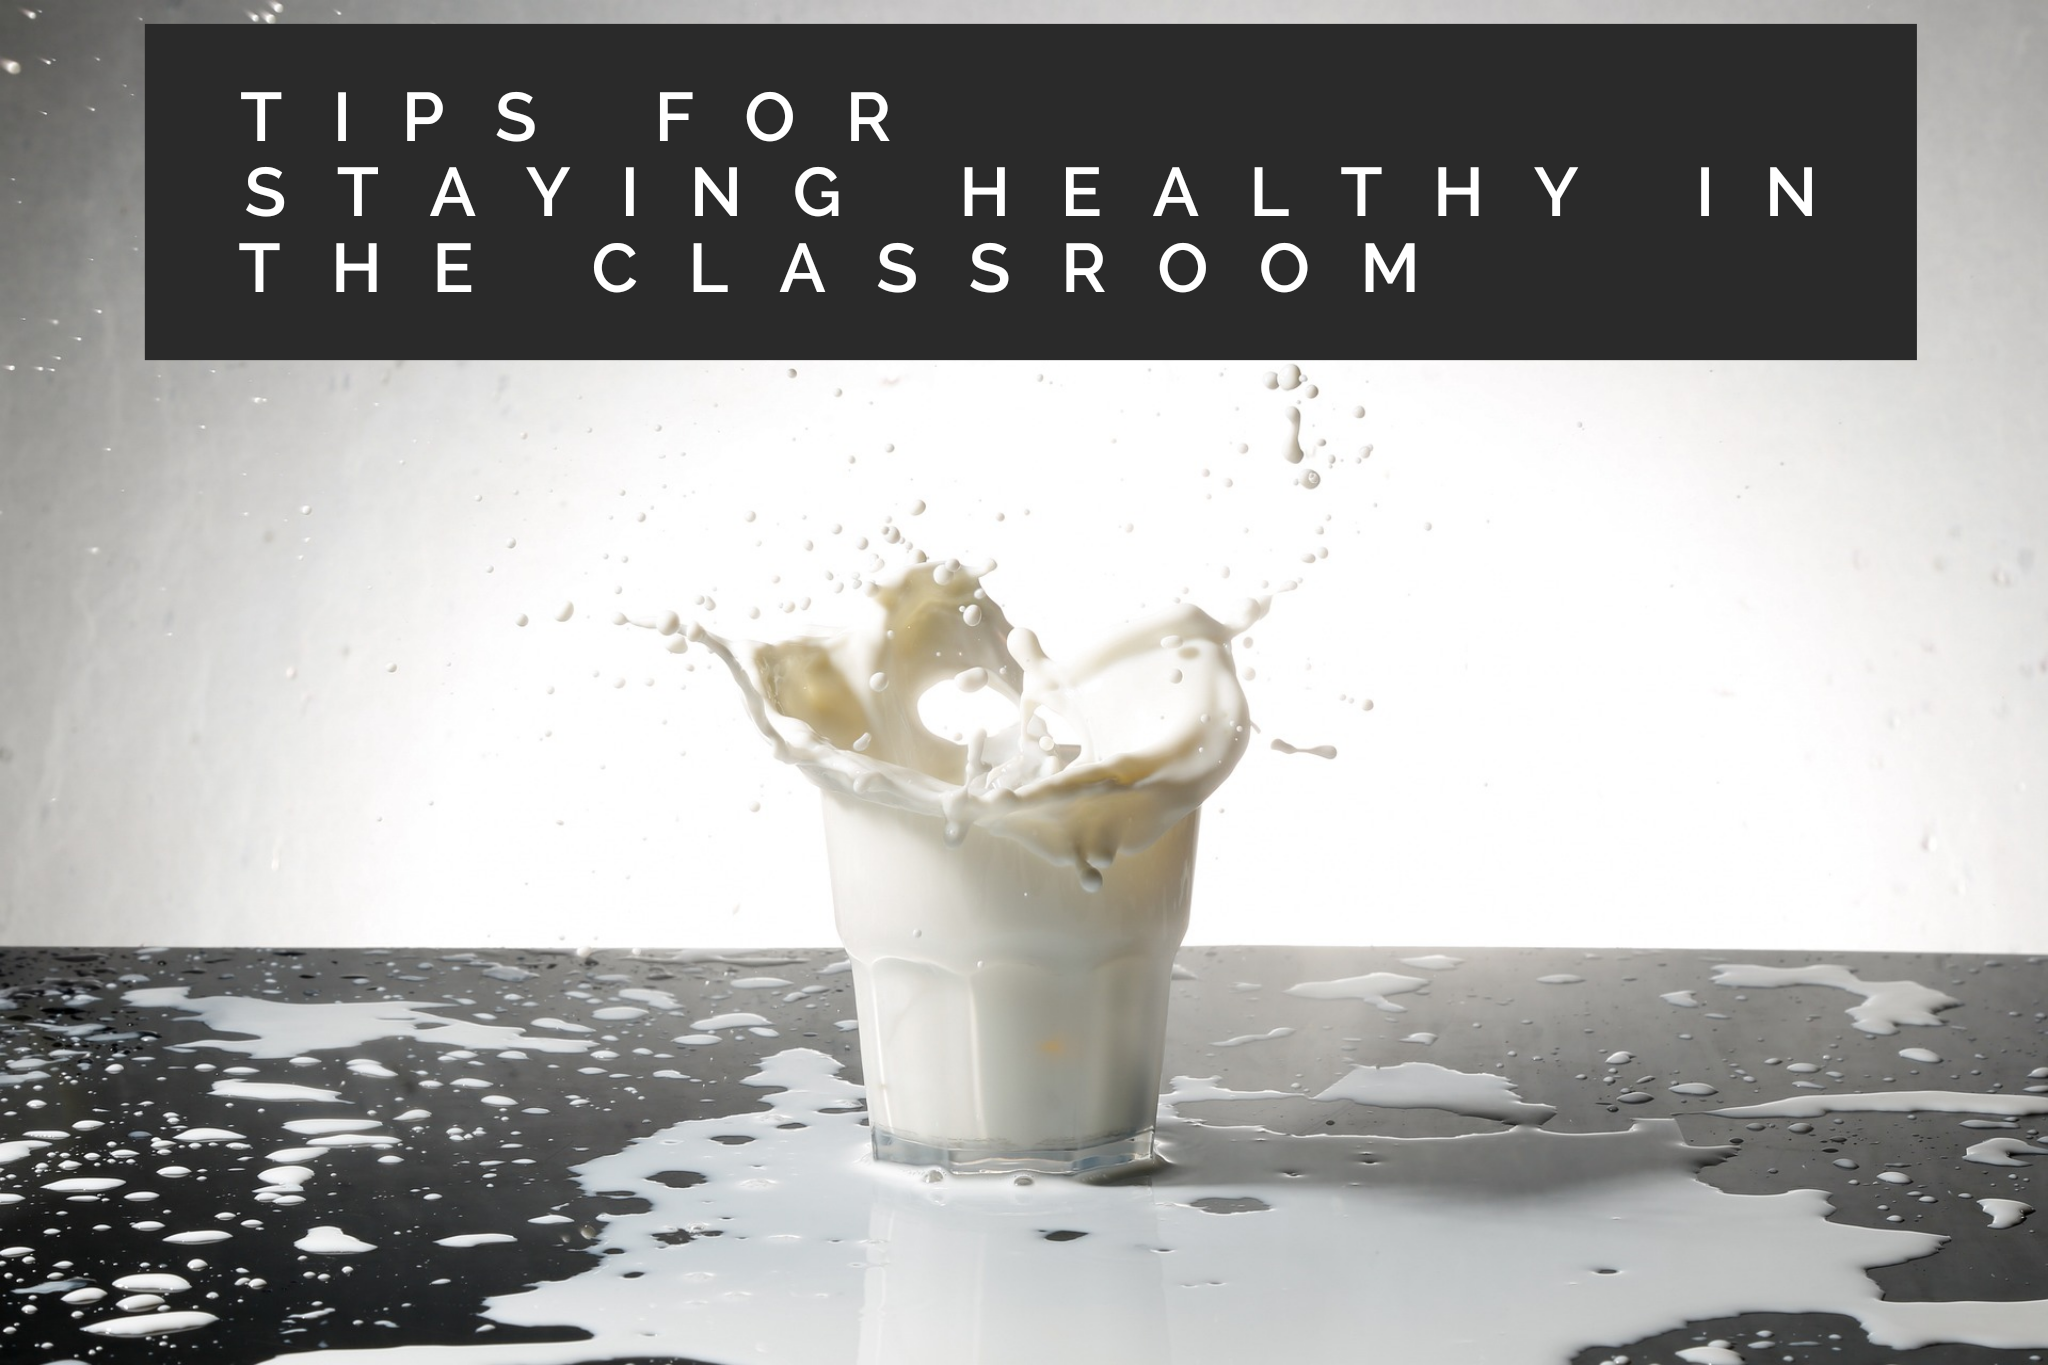 Tips for Staying Healthy in the Classroom